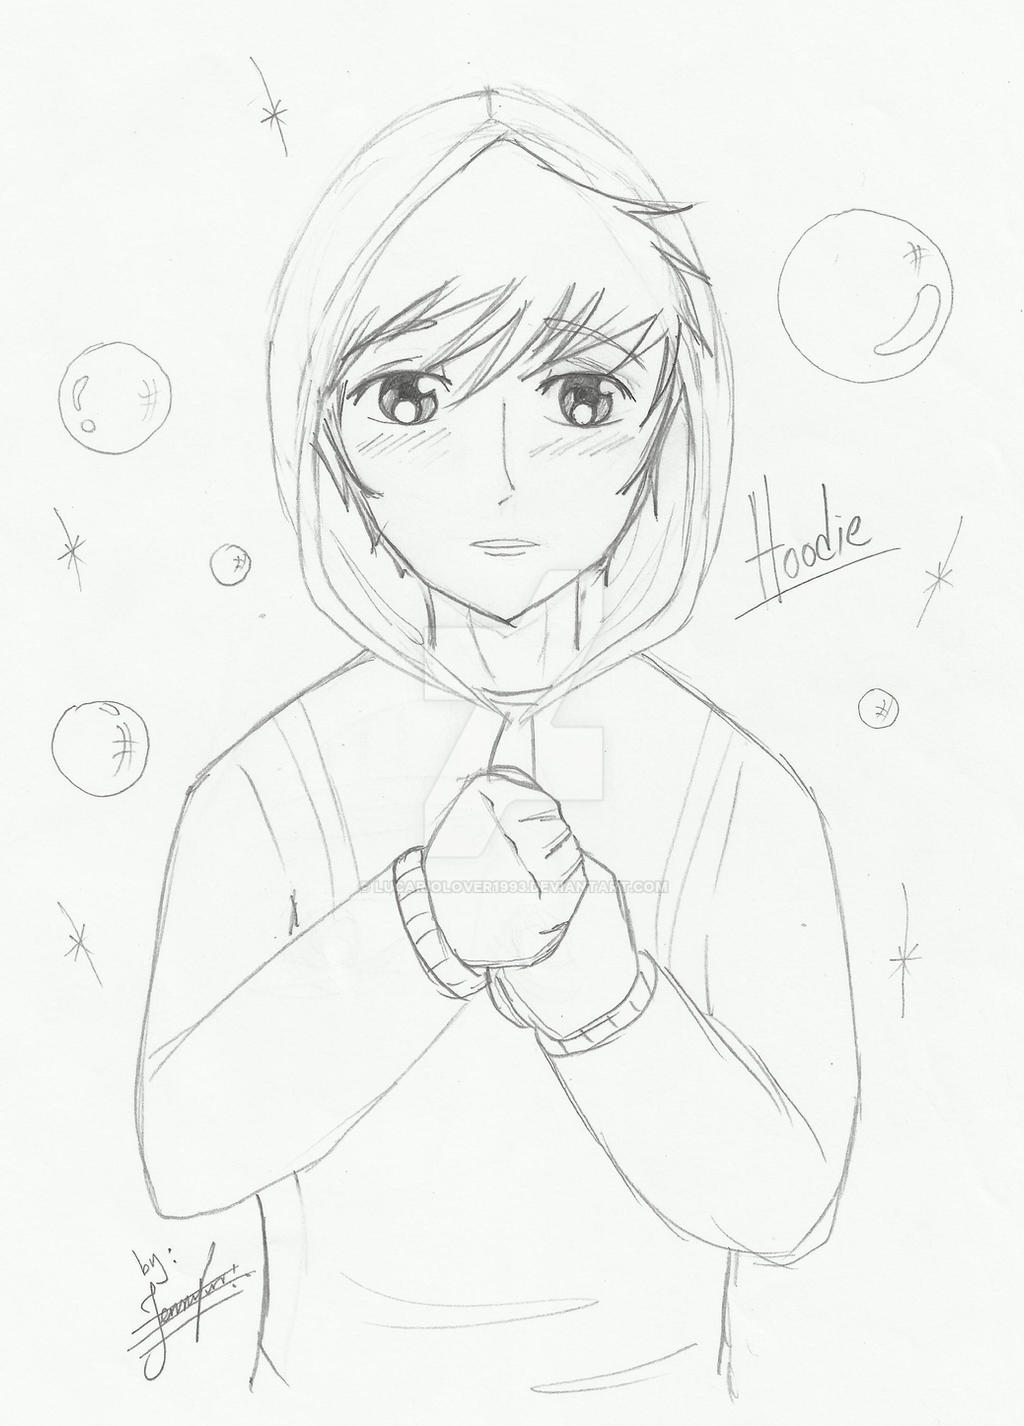 Hoodie Anime (sketch 1) by lucariolover1993 on DeviantArt